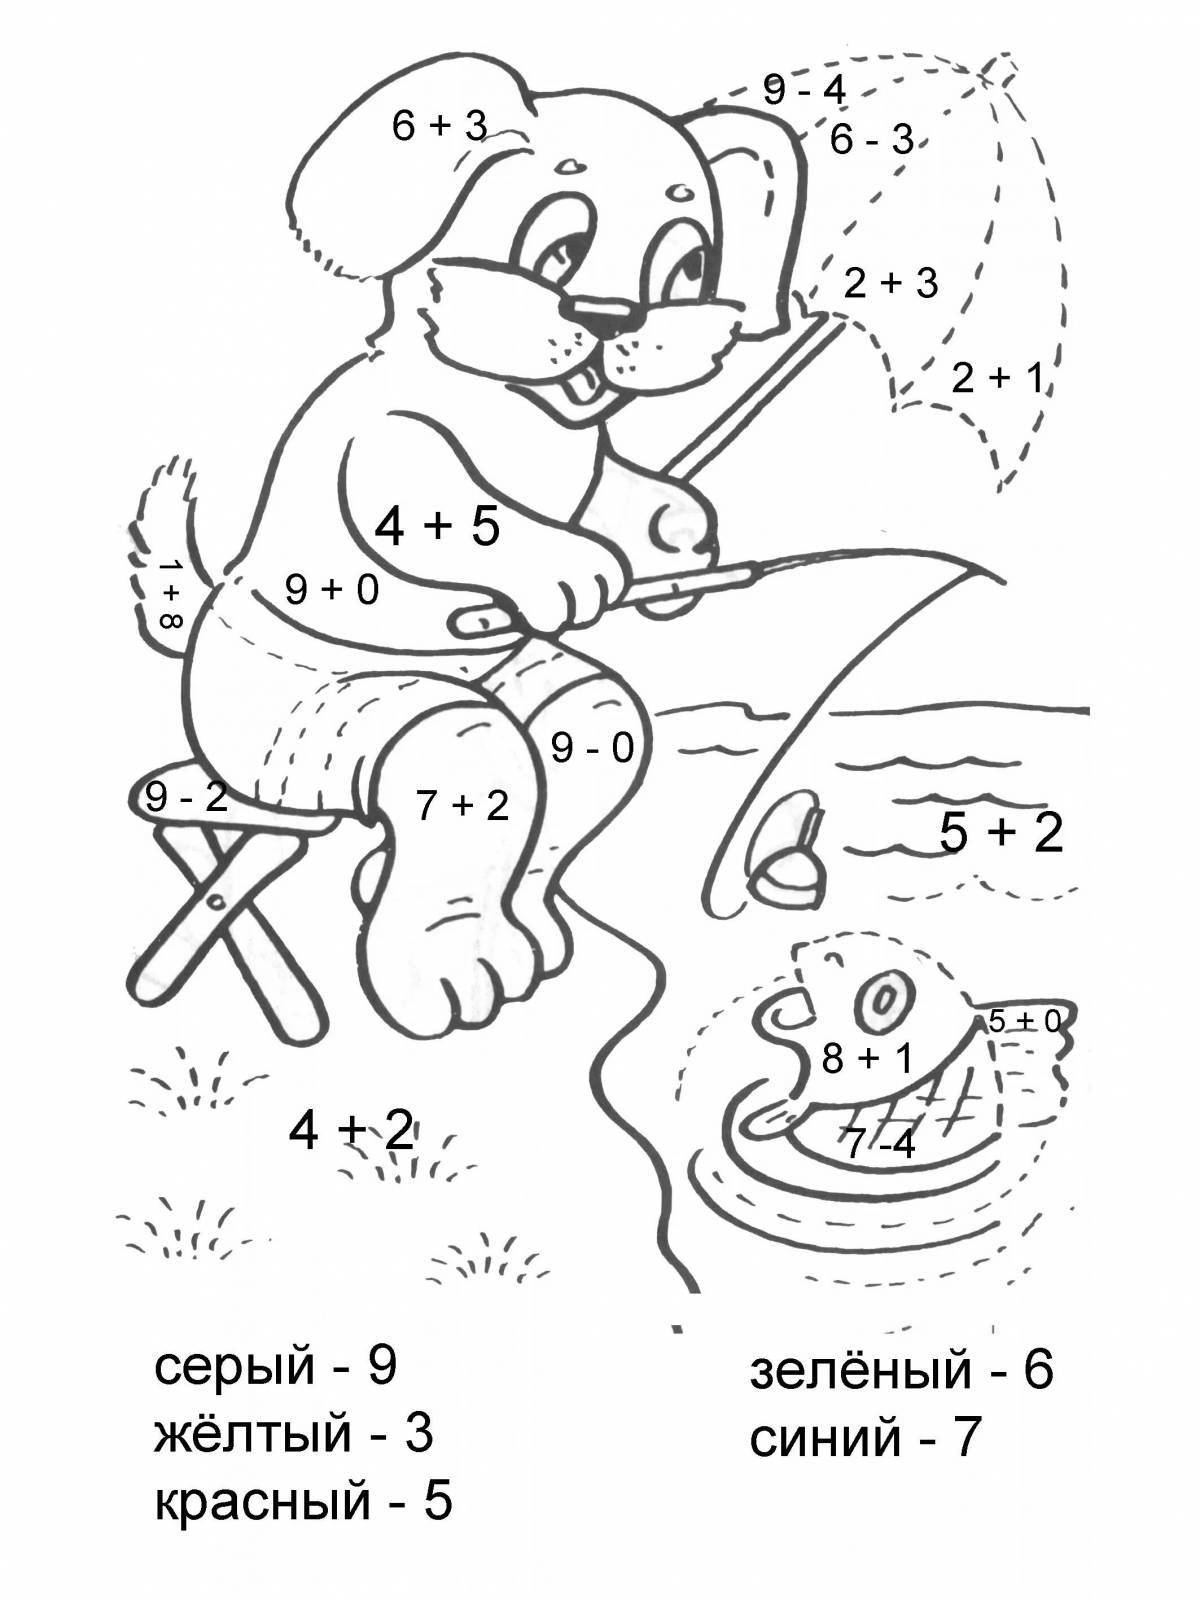 Creative math coloring for preschoolers up to 10 years old